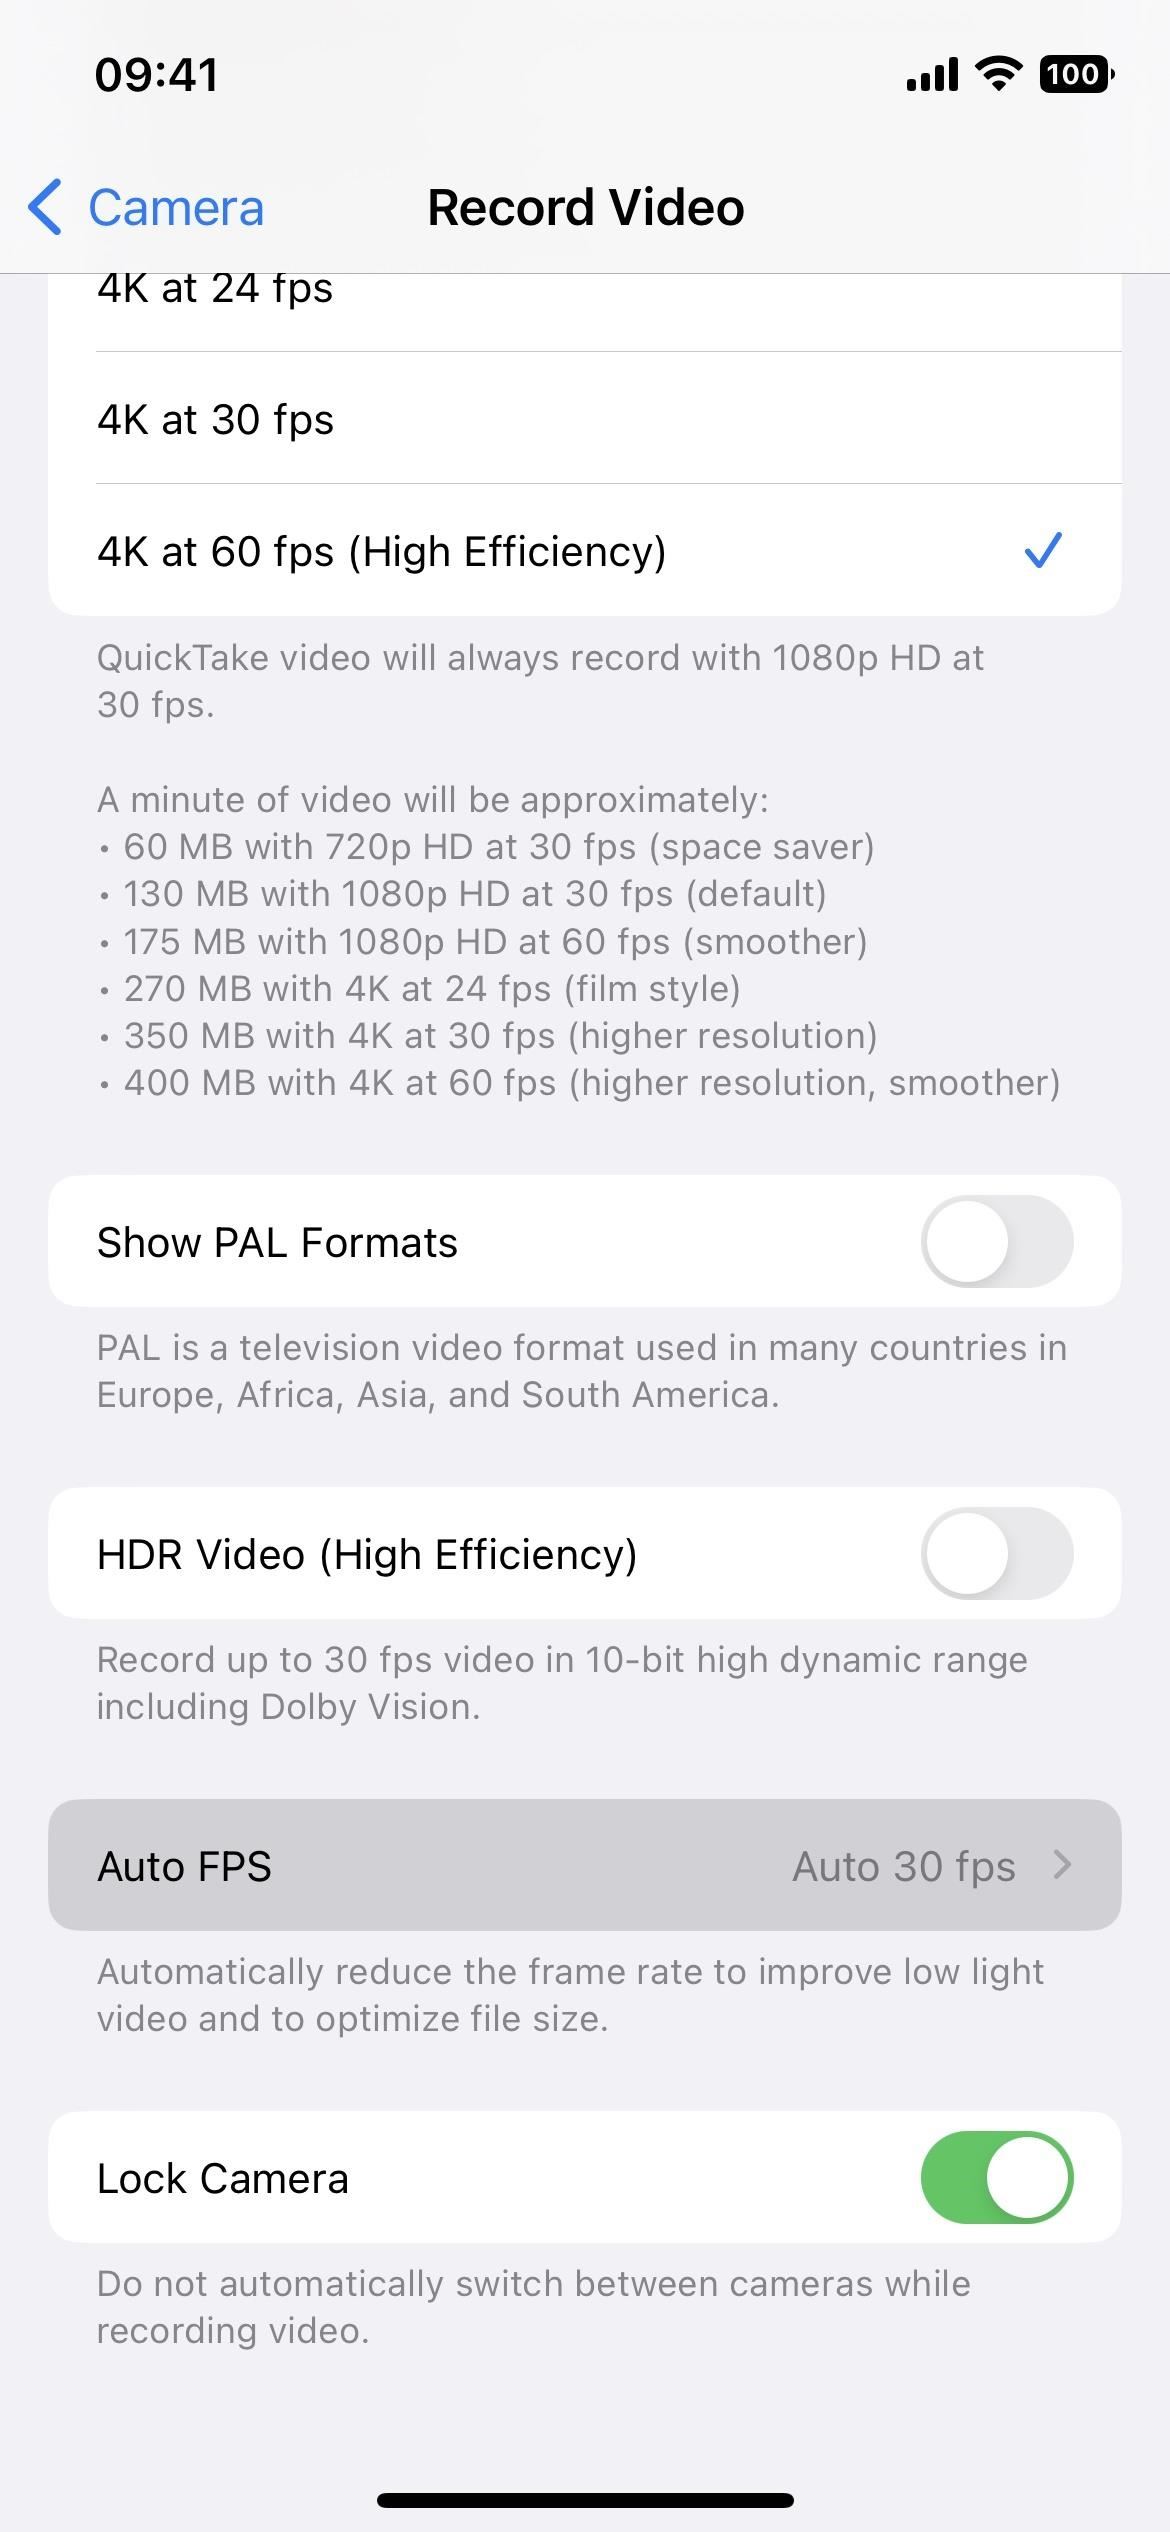 This iPhone setting instantly improves video quality when shooting in low light conditions